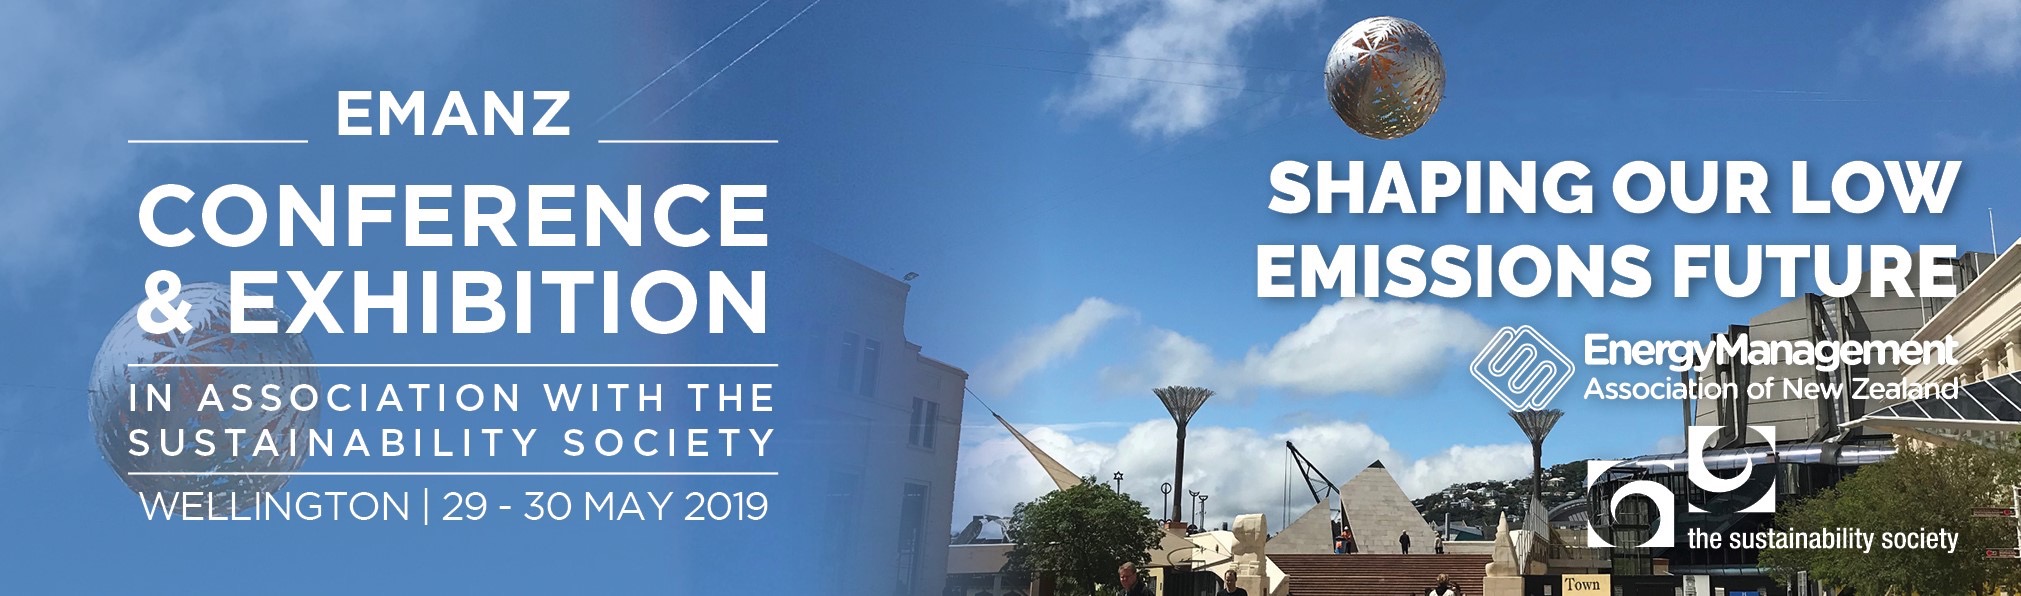 EMANZ_TSS Conference Banner 2019 (2) The Sustainability Society